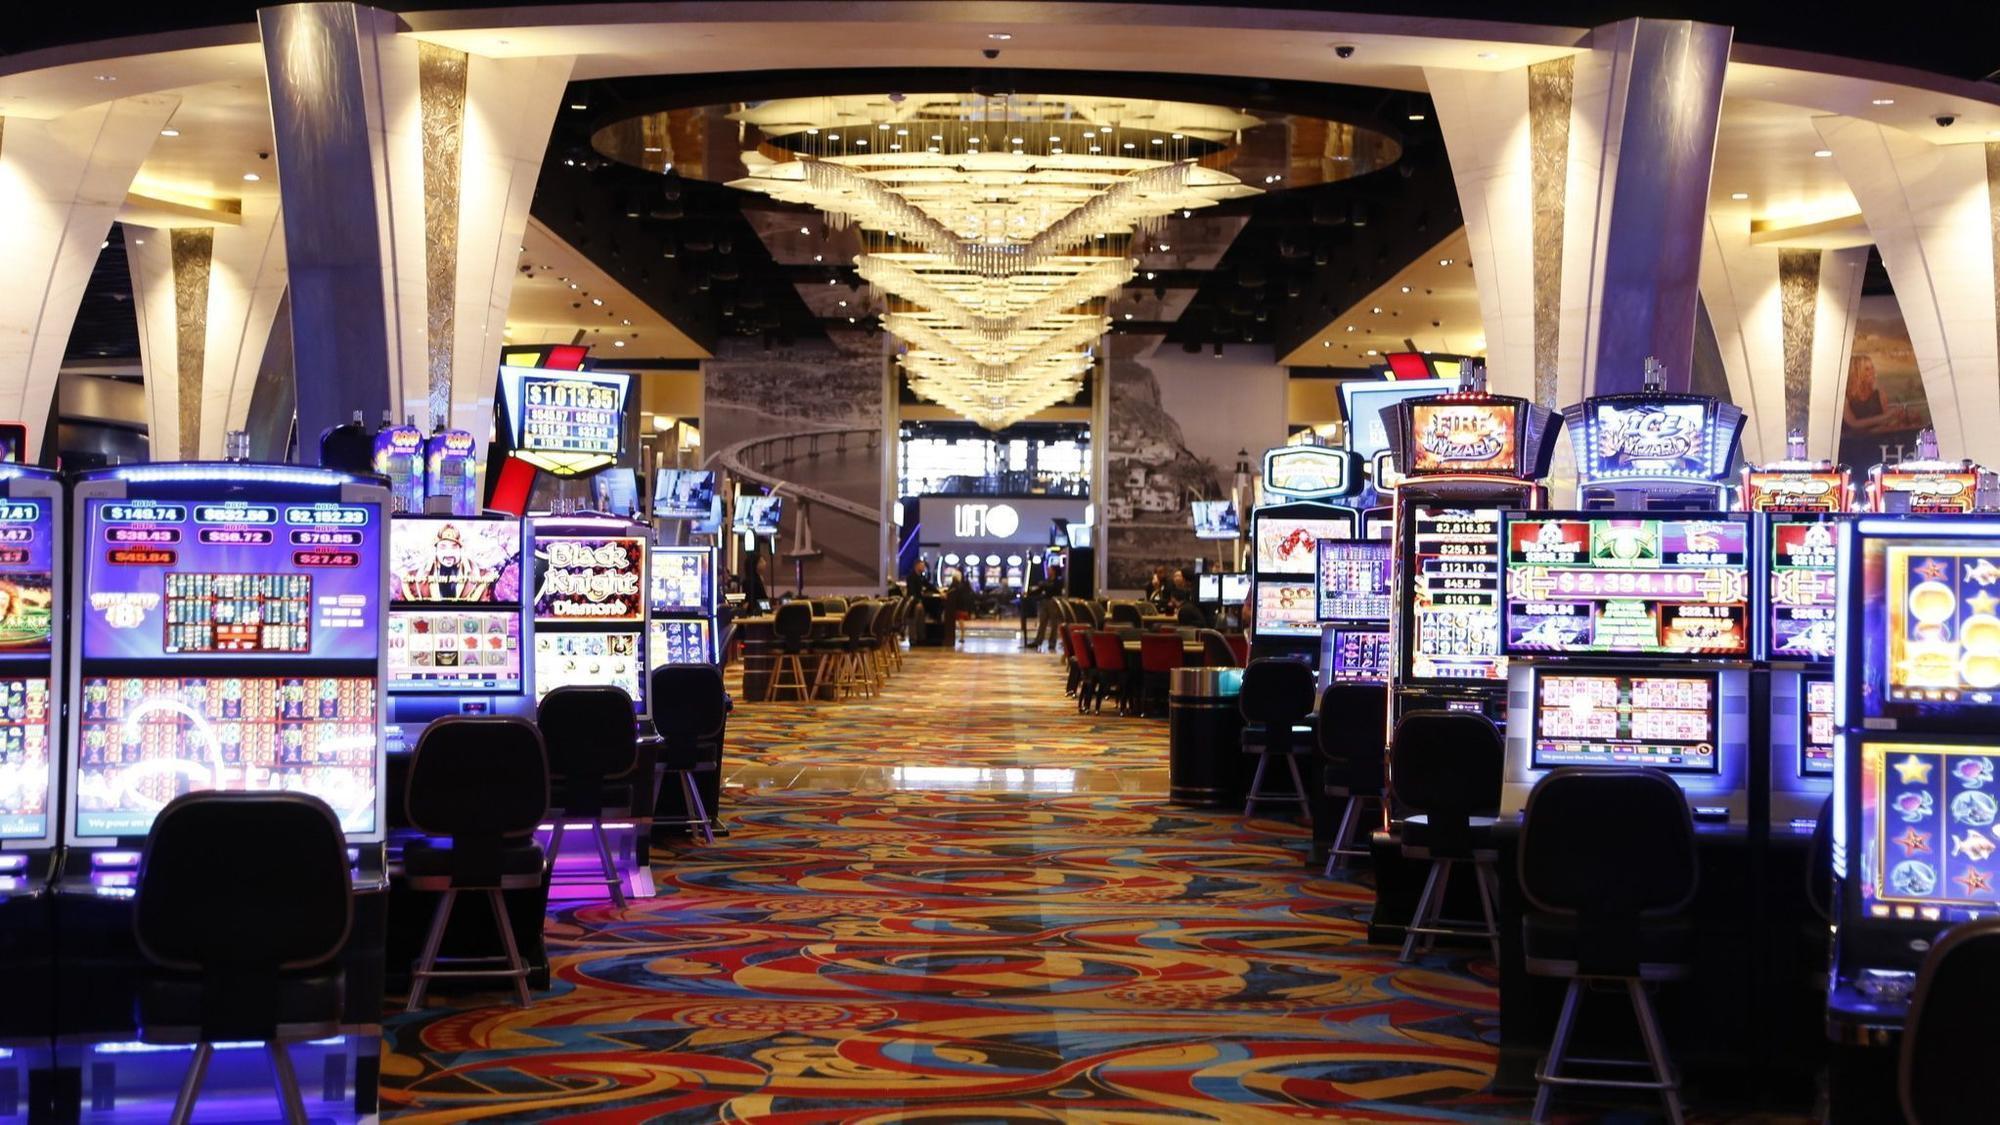 'Rigged' slots among complaints about AZ casinos